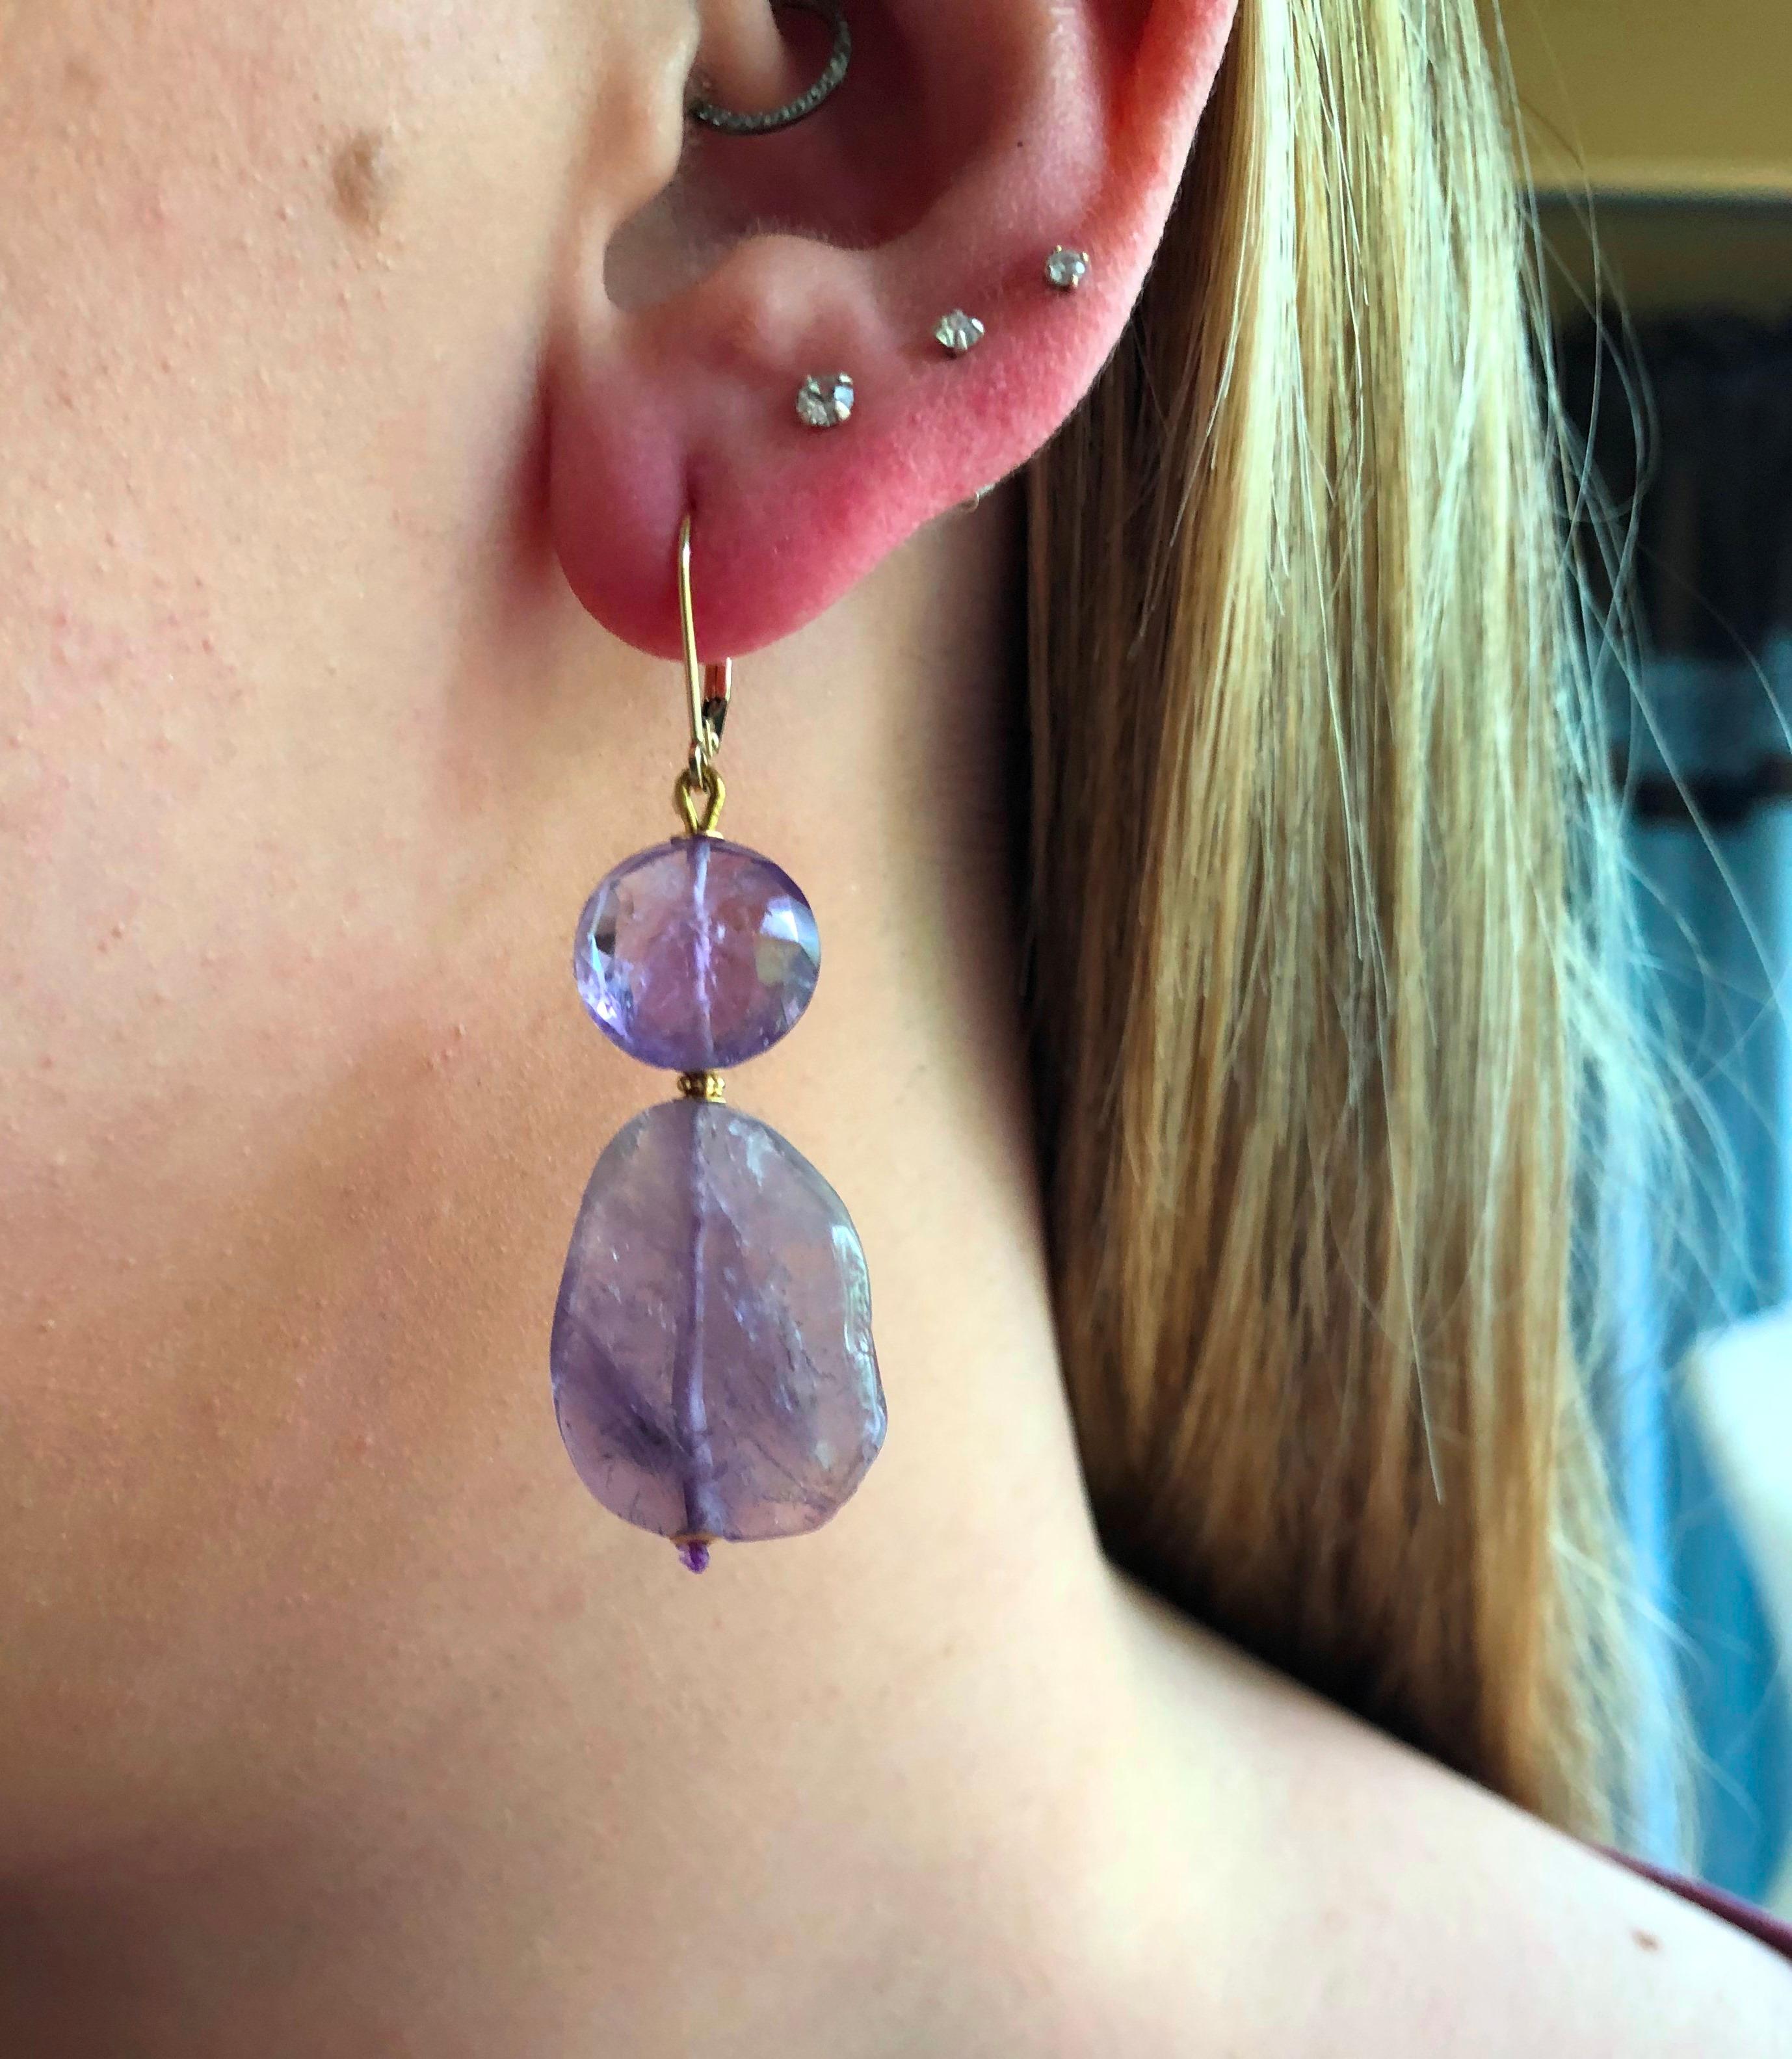 These fabulous double asymmetrical amethyst bead gemstone earrings with 14 k yellow gold wiring and lever-back have a graceful look to them. At 1.75 inches long the earring classically frames the face. The contrast of the amethyst bead with the